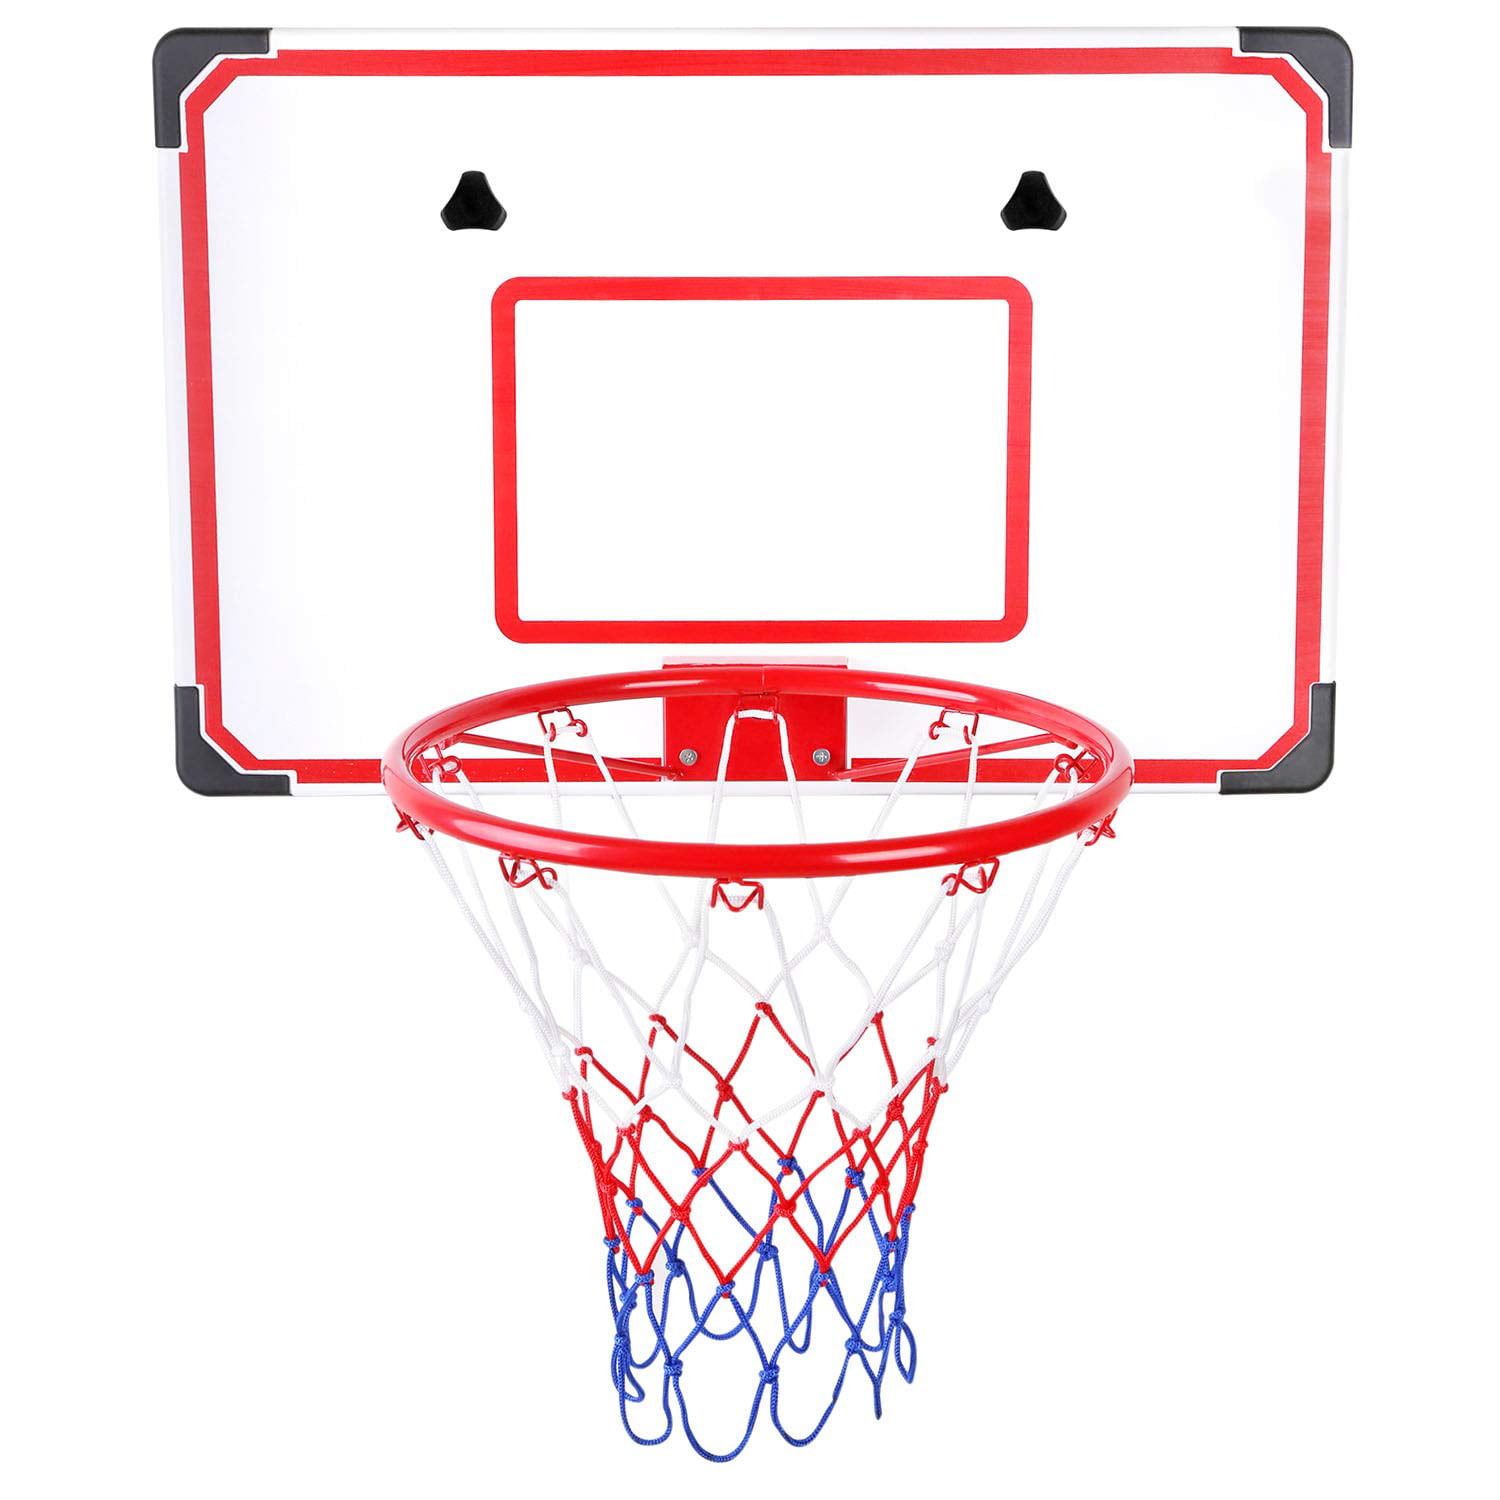 Net Wall Mounted Boards Ball Macro Giant Mini Basketball Hoop and Backboard Set Indoor Sports Game Red for Home with Board 18 x 12 Inch Board Pump Dorm Hoop Over The Door Office 